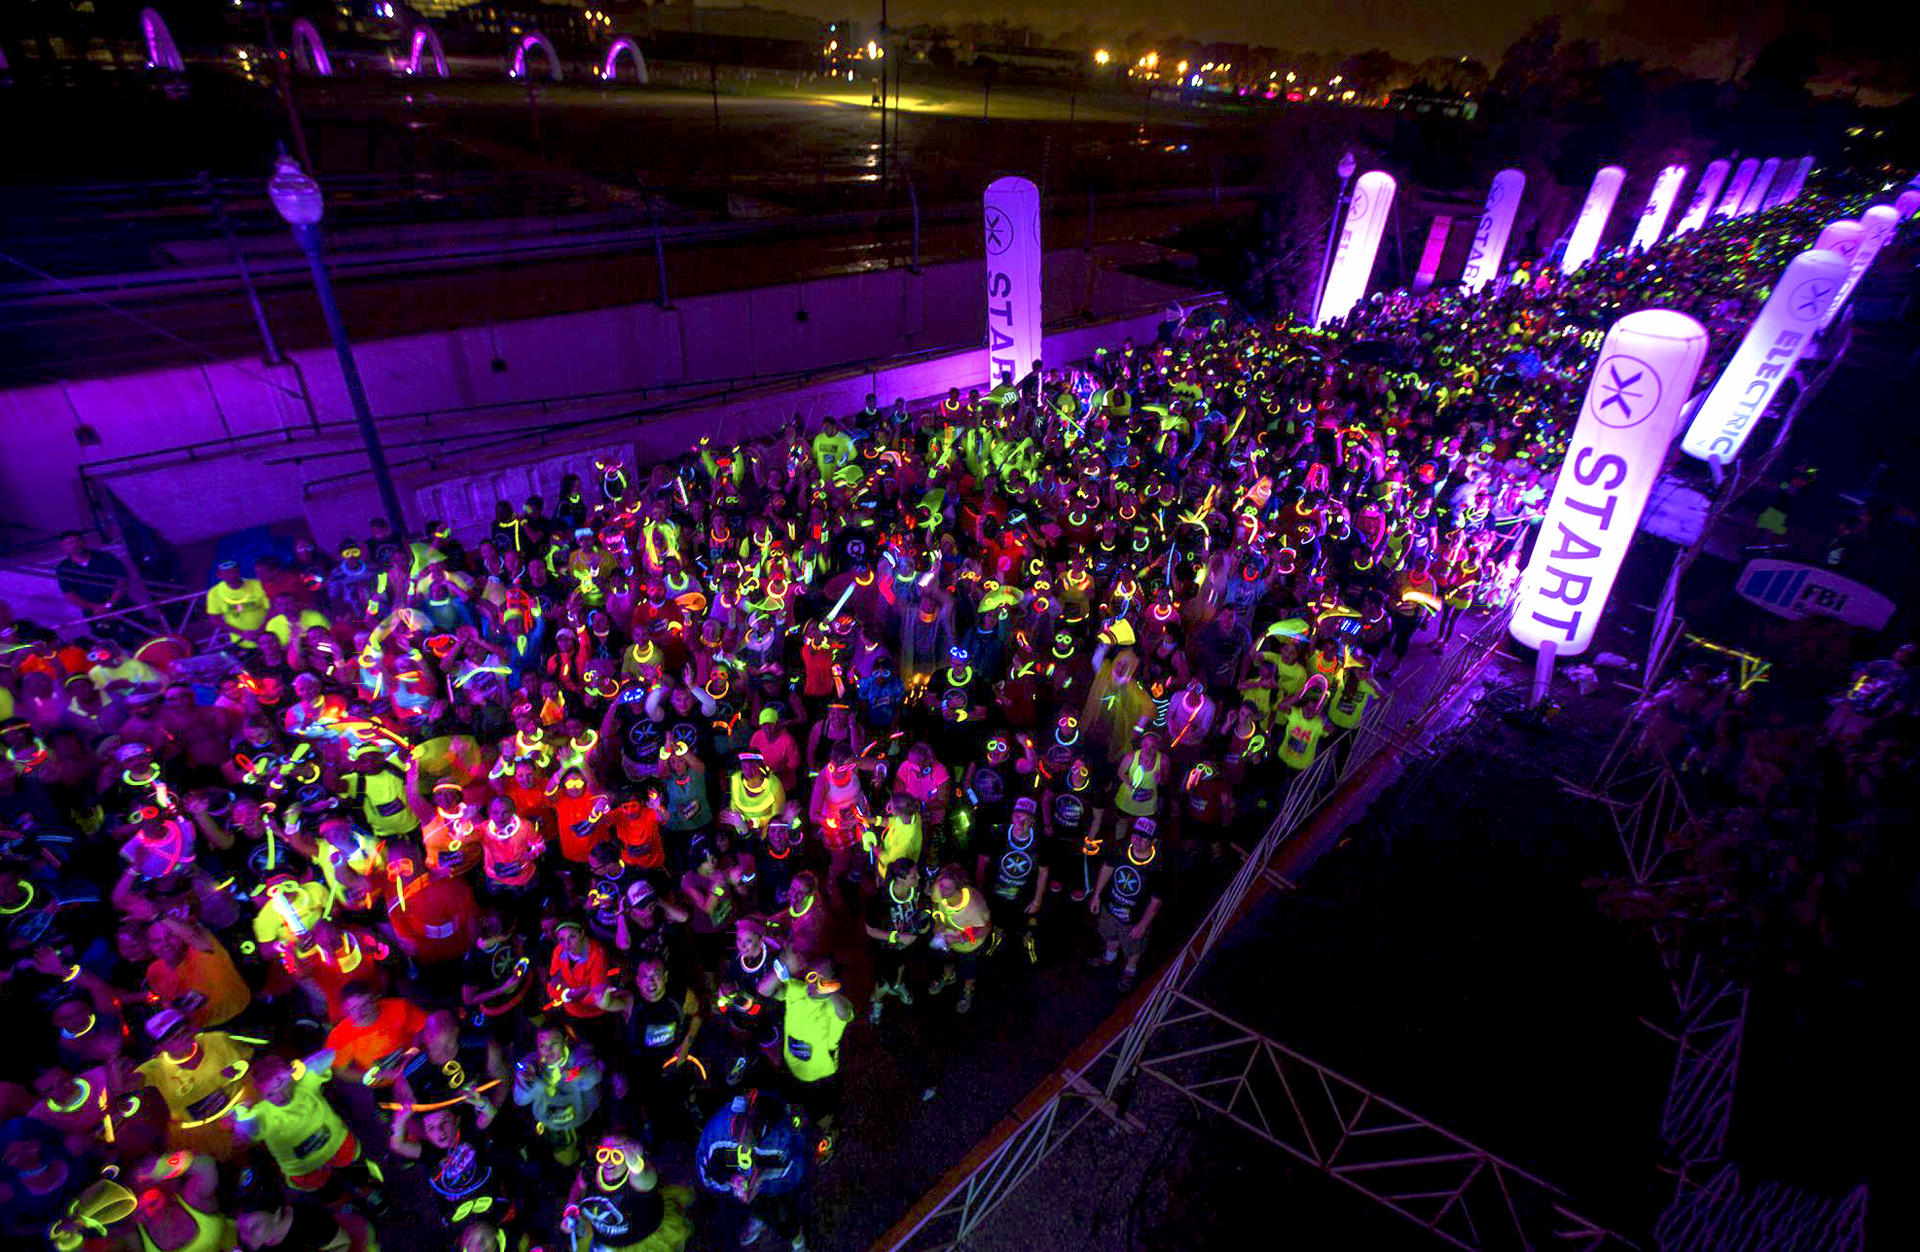 An Electric Run at the Indiana State Fairgrounds, in the United States.